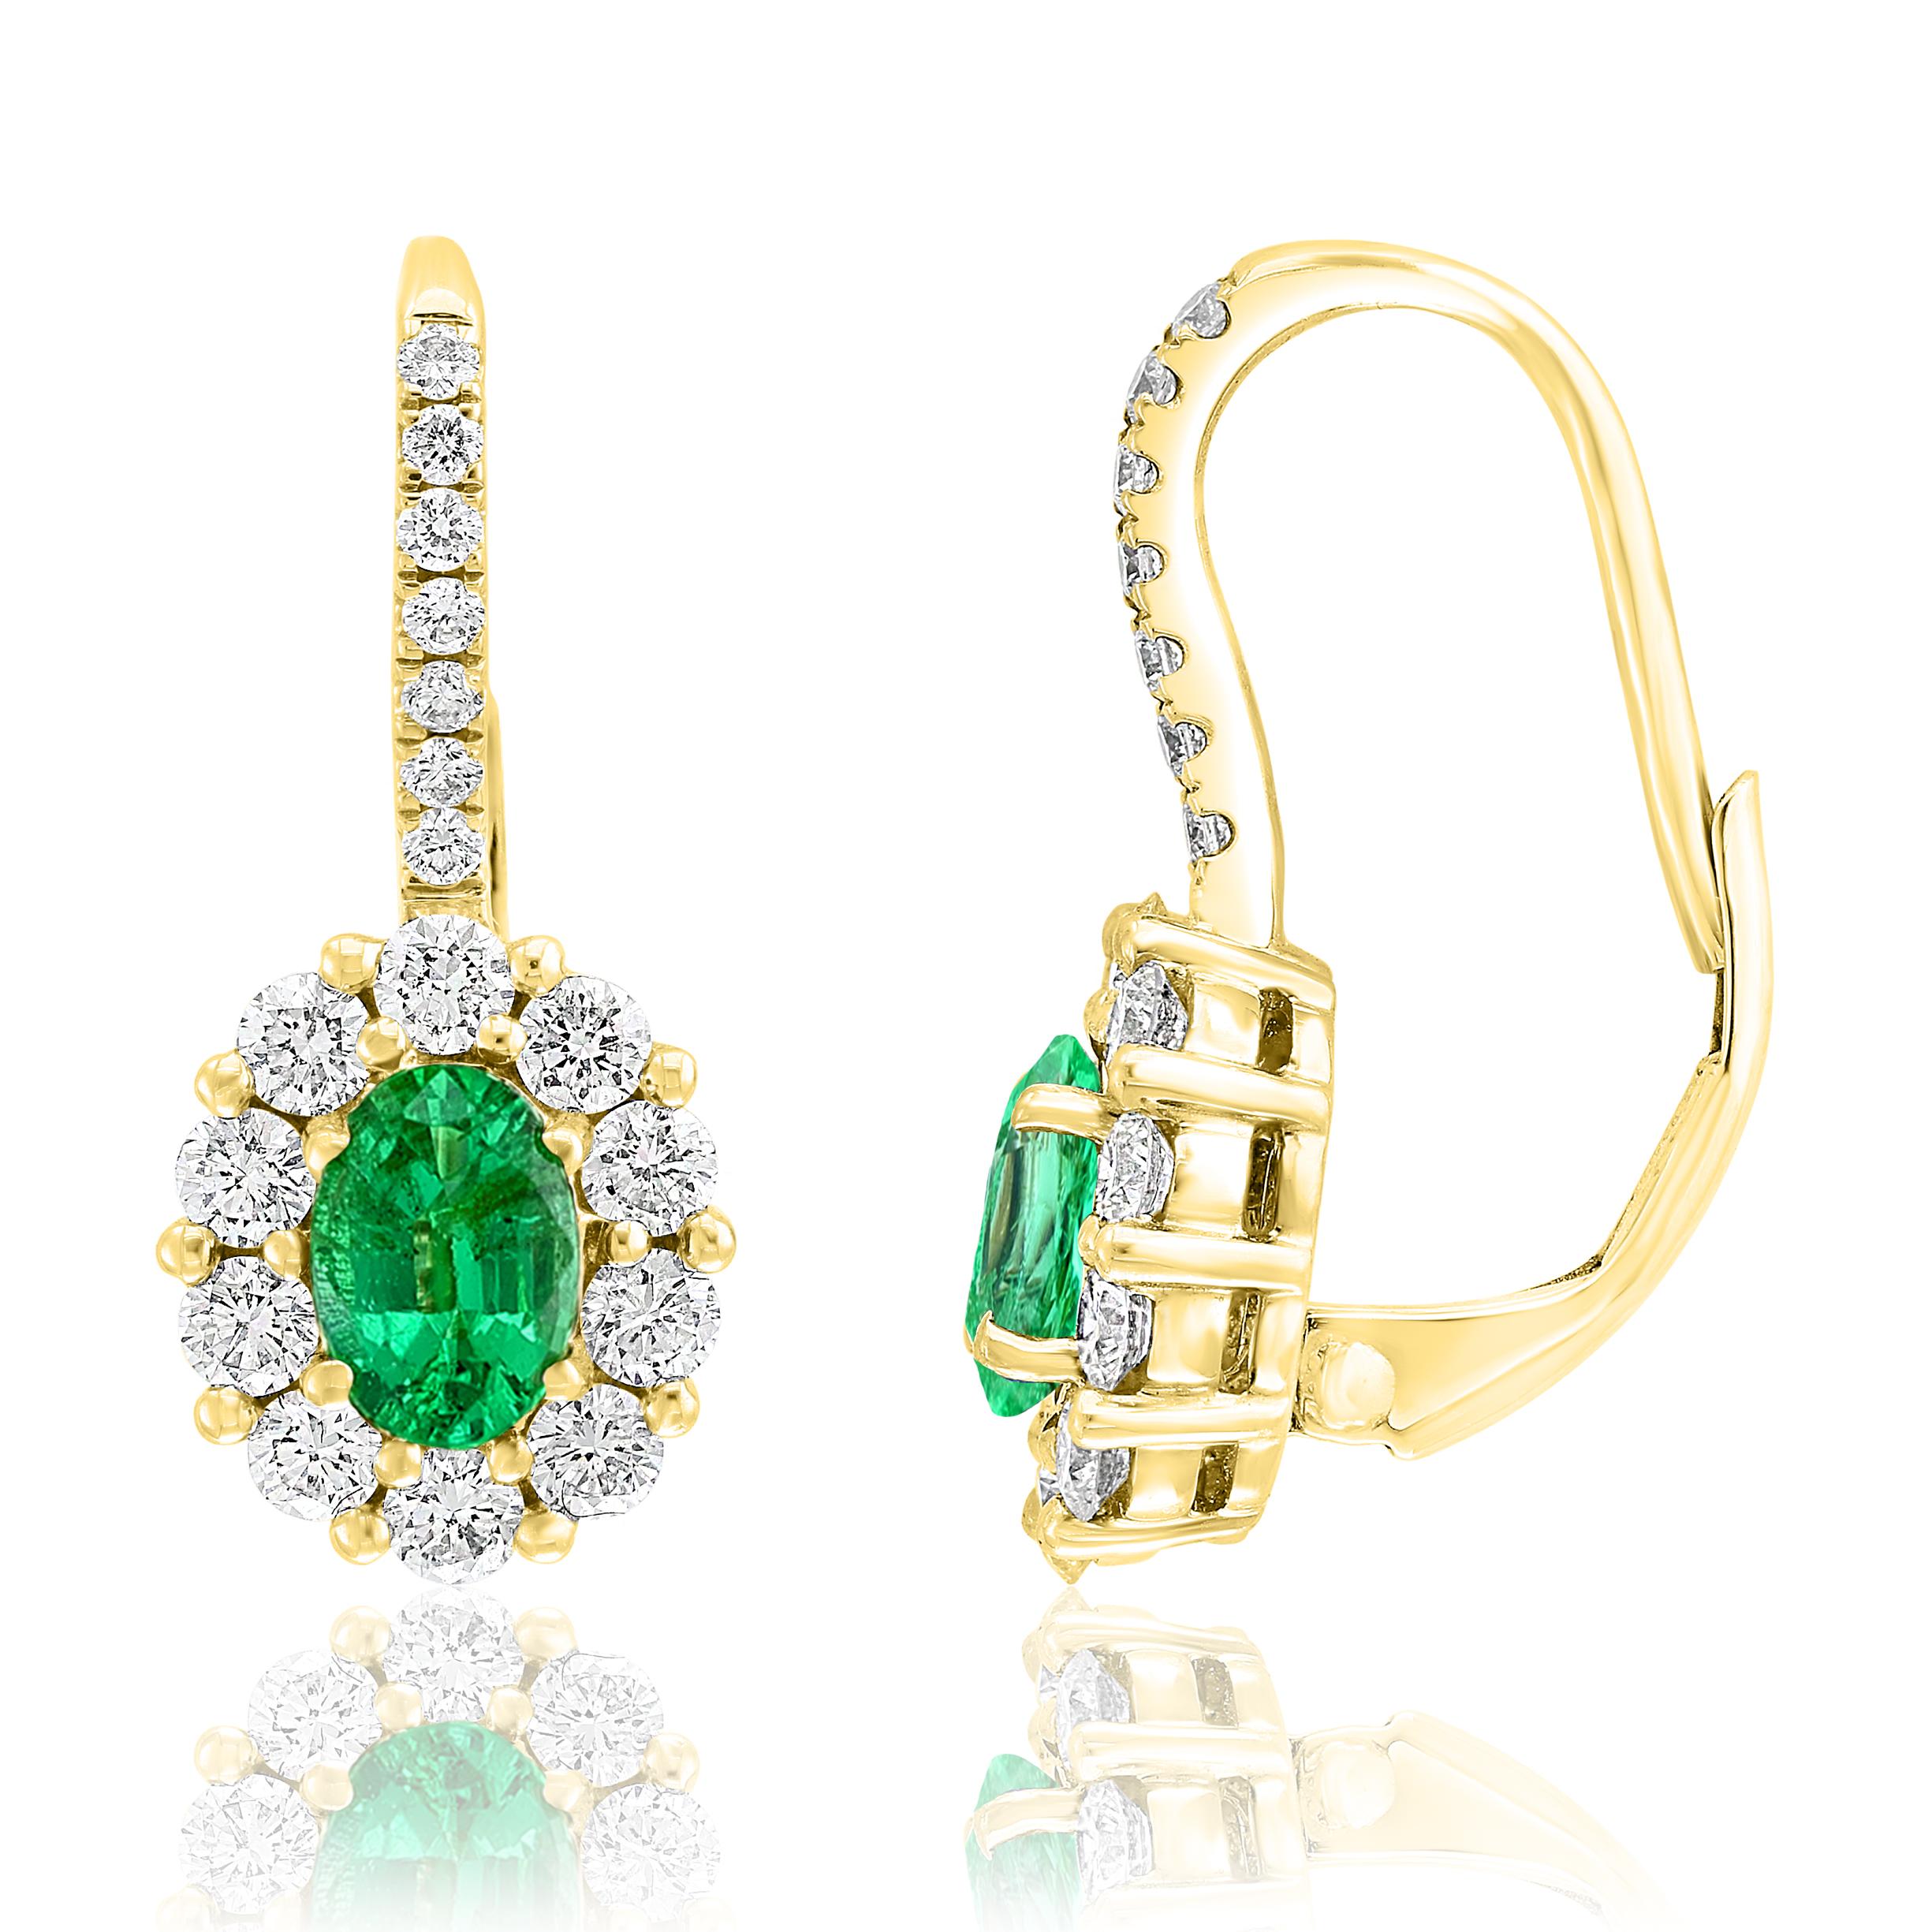 A simple pair of Lever back earrings showcasing 0.80 carats of oval cut green Emeralds, surrounded by a single row of 34 round brilliant diamonds weighing 0.92 carats. Made in 18-karat Yellow gold.